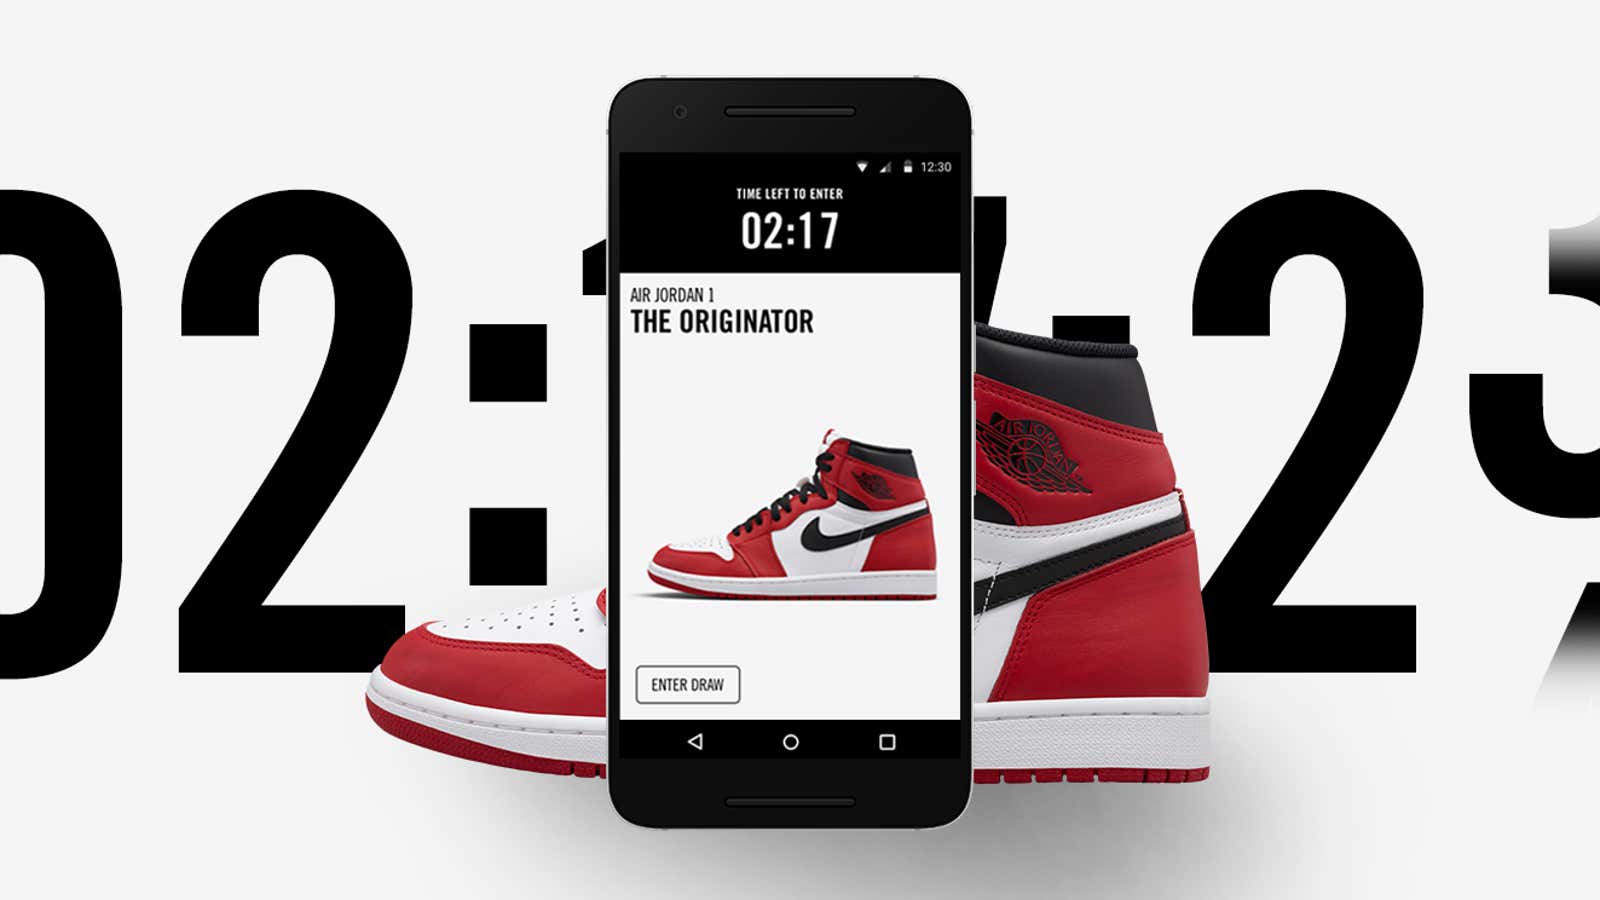 Overdreven pin Politieagent Nike's SNKRS app is fueling its digital business